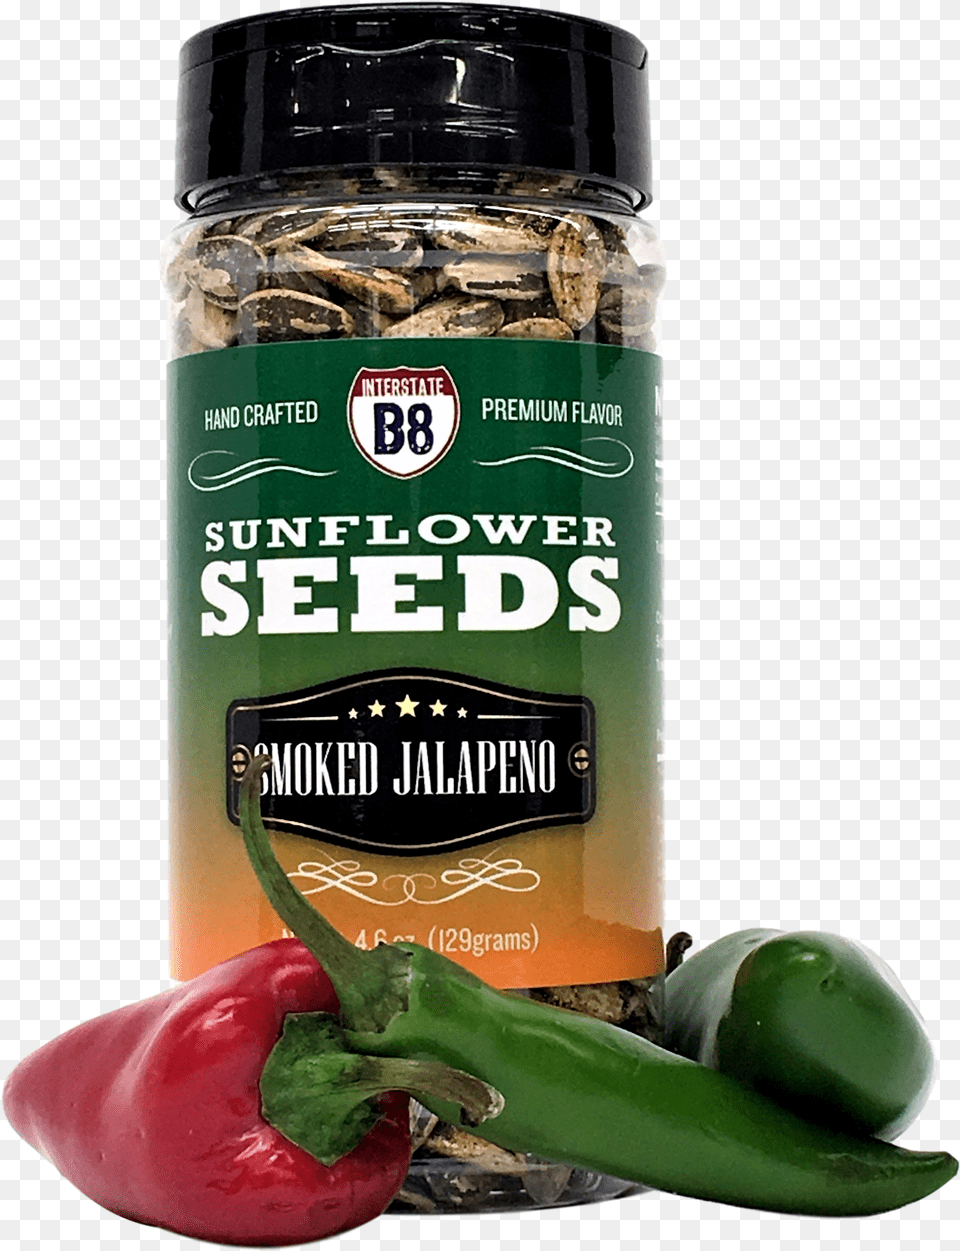 Smoked Jalapeno Sunflower Seeds Sunflower Seed, Food, Pepper, Plant, Produce Png